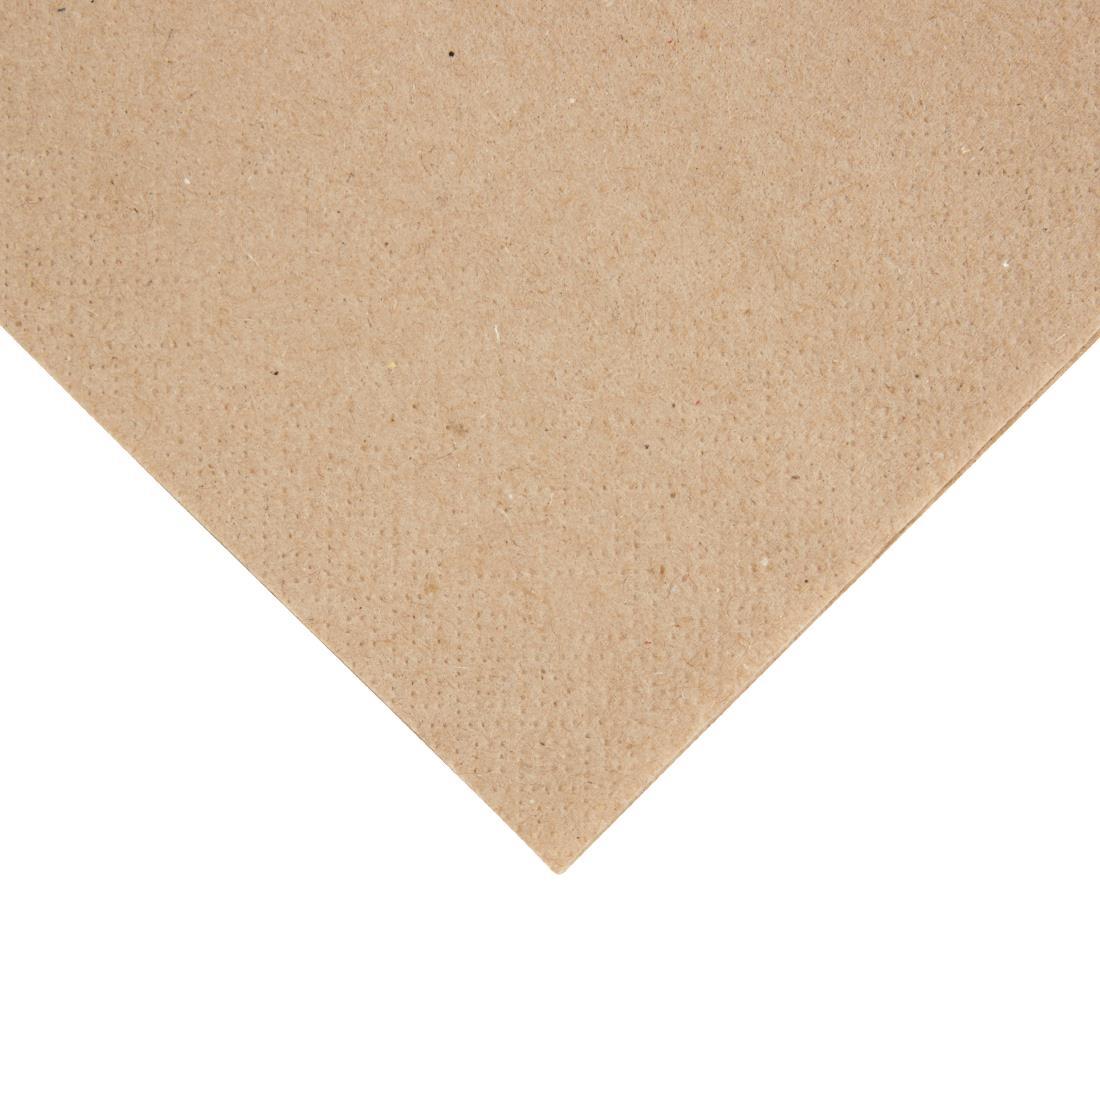 Fiesta Recyclable Recycled Cocktail Napkin Kraft 24x24cm 2ply 1/4 Fold (Pack of 4000) - FE217  - 2